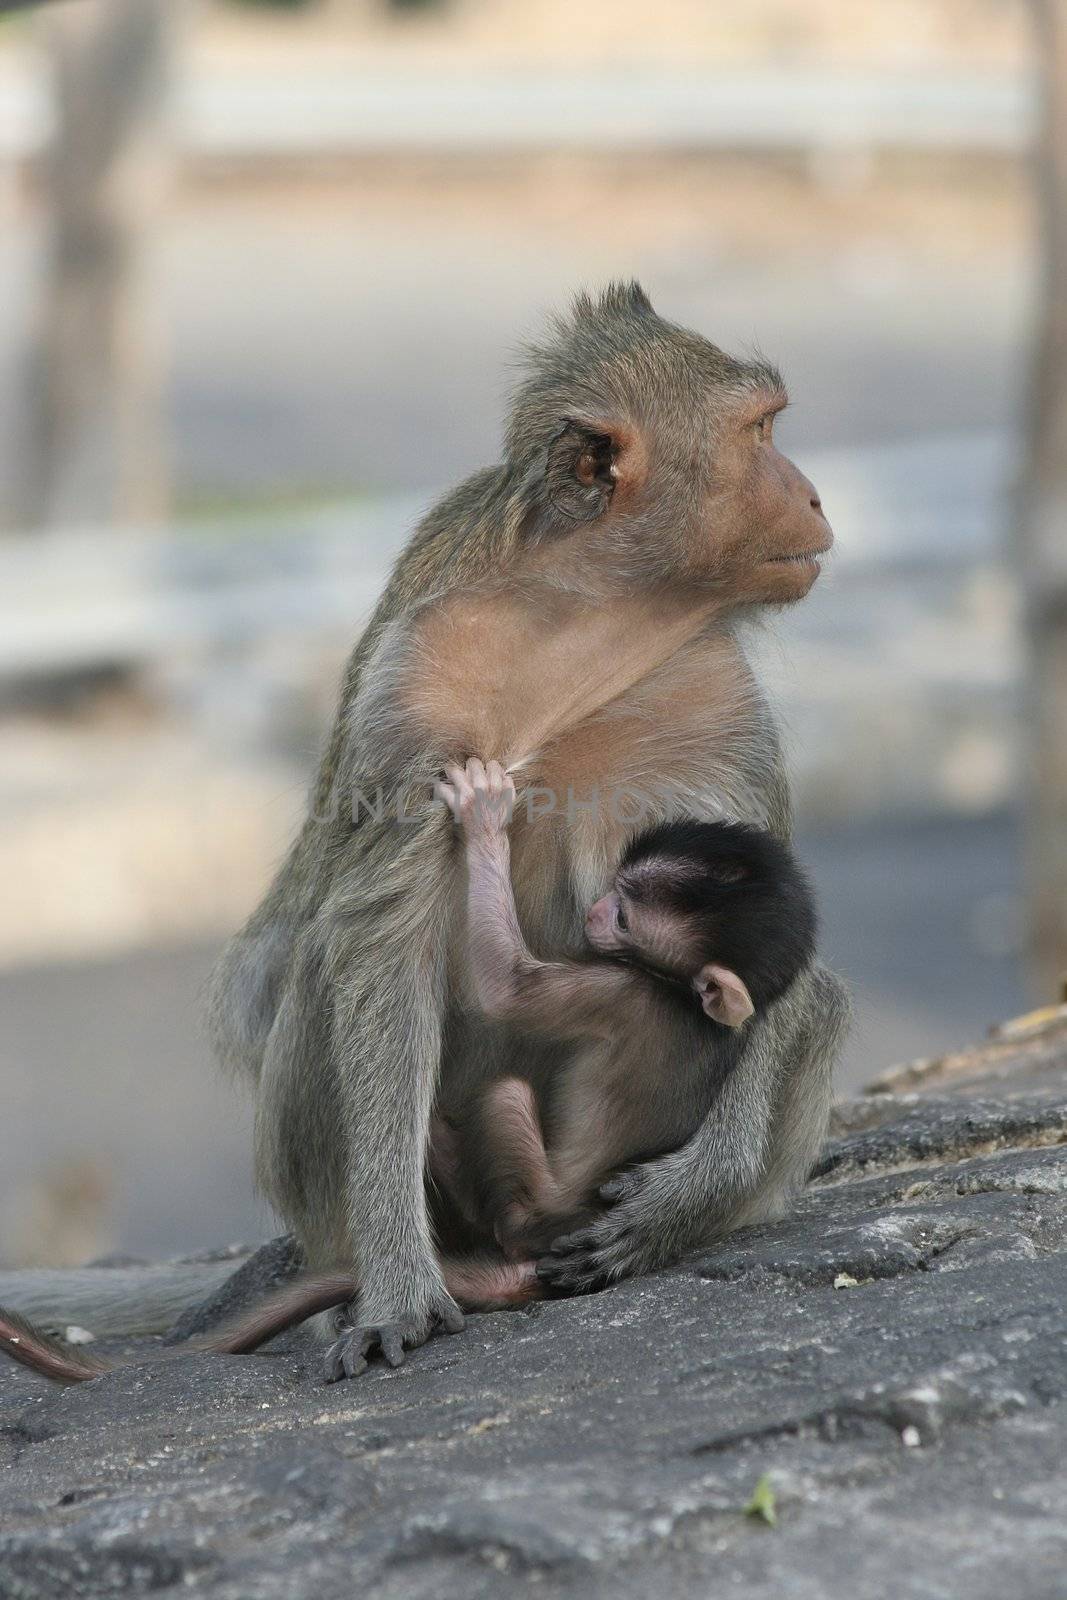 Monkey with her baby by vvvera